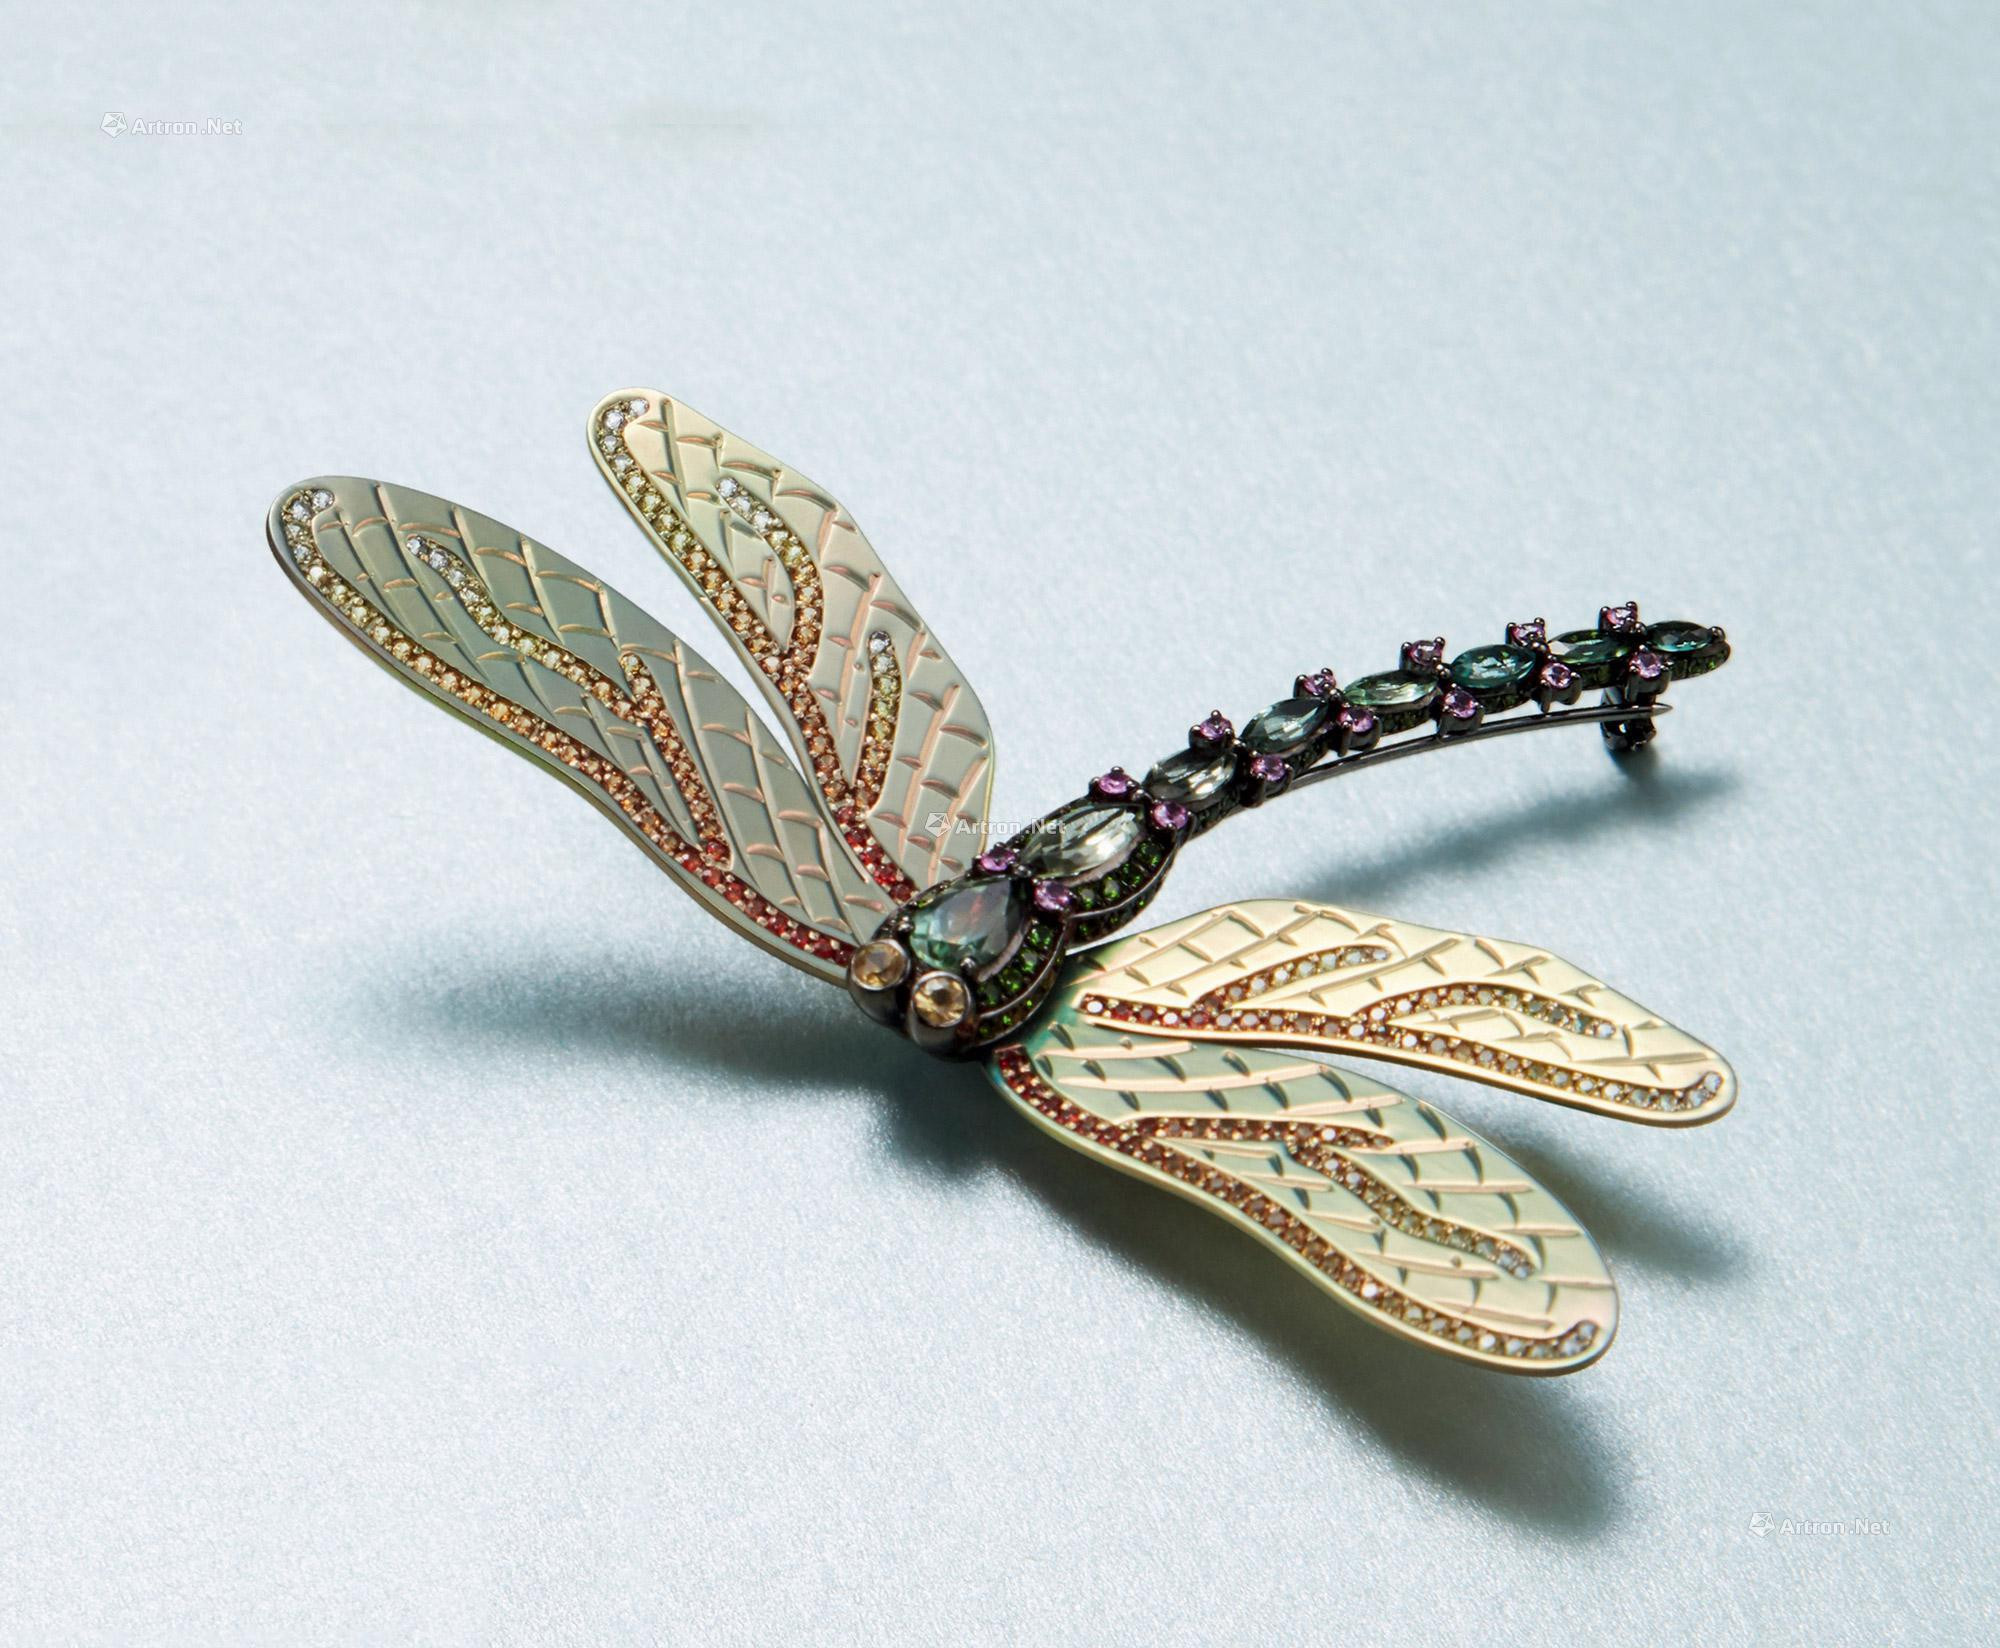 A COLORED GEM AND DIAMOND ‘DRAGONFLY’ BROOCH MOUNTED IN TITANIUM